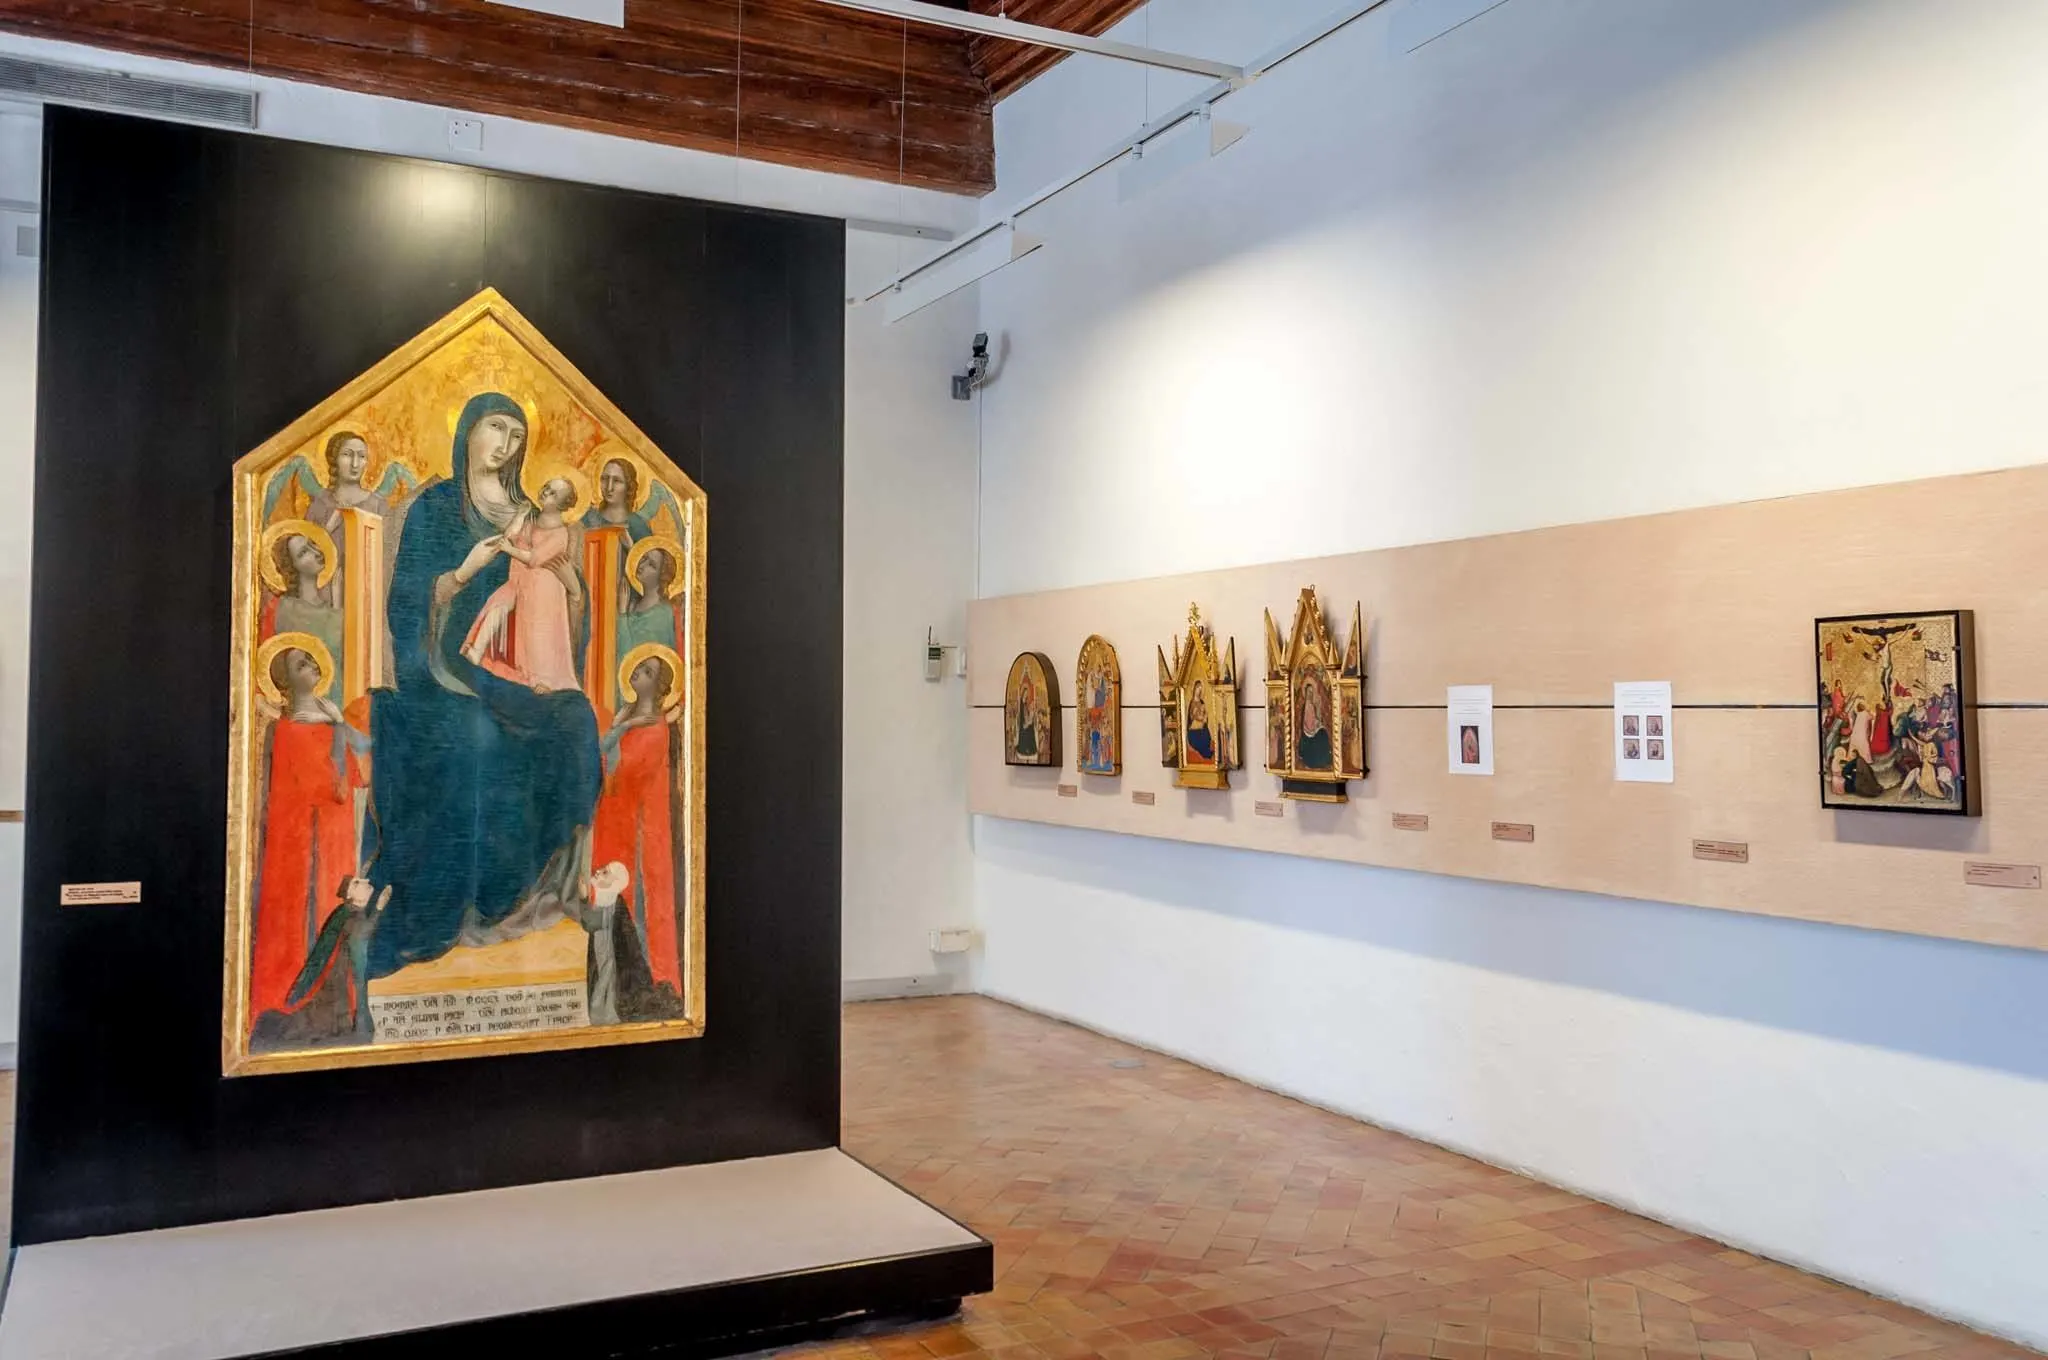 Religious art on display at a museum.